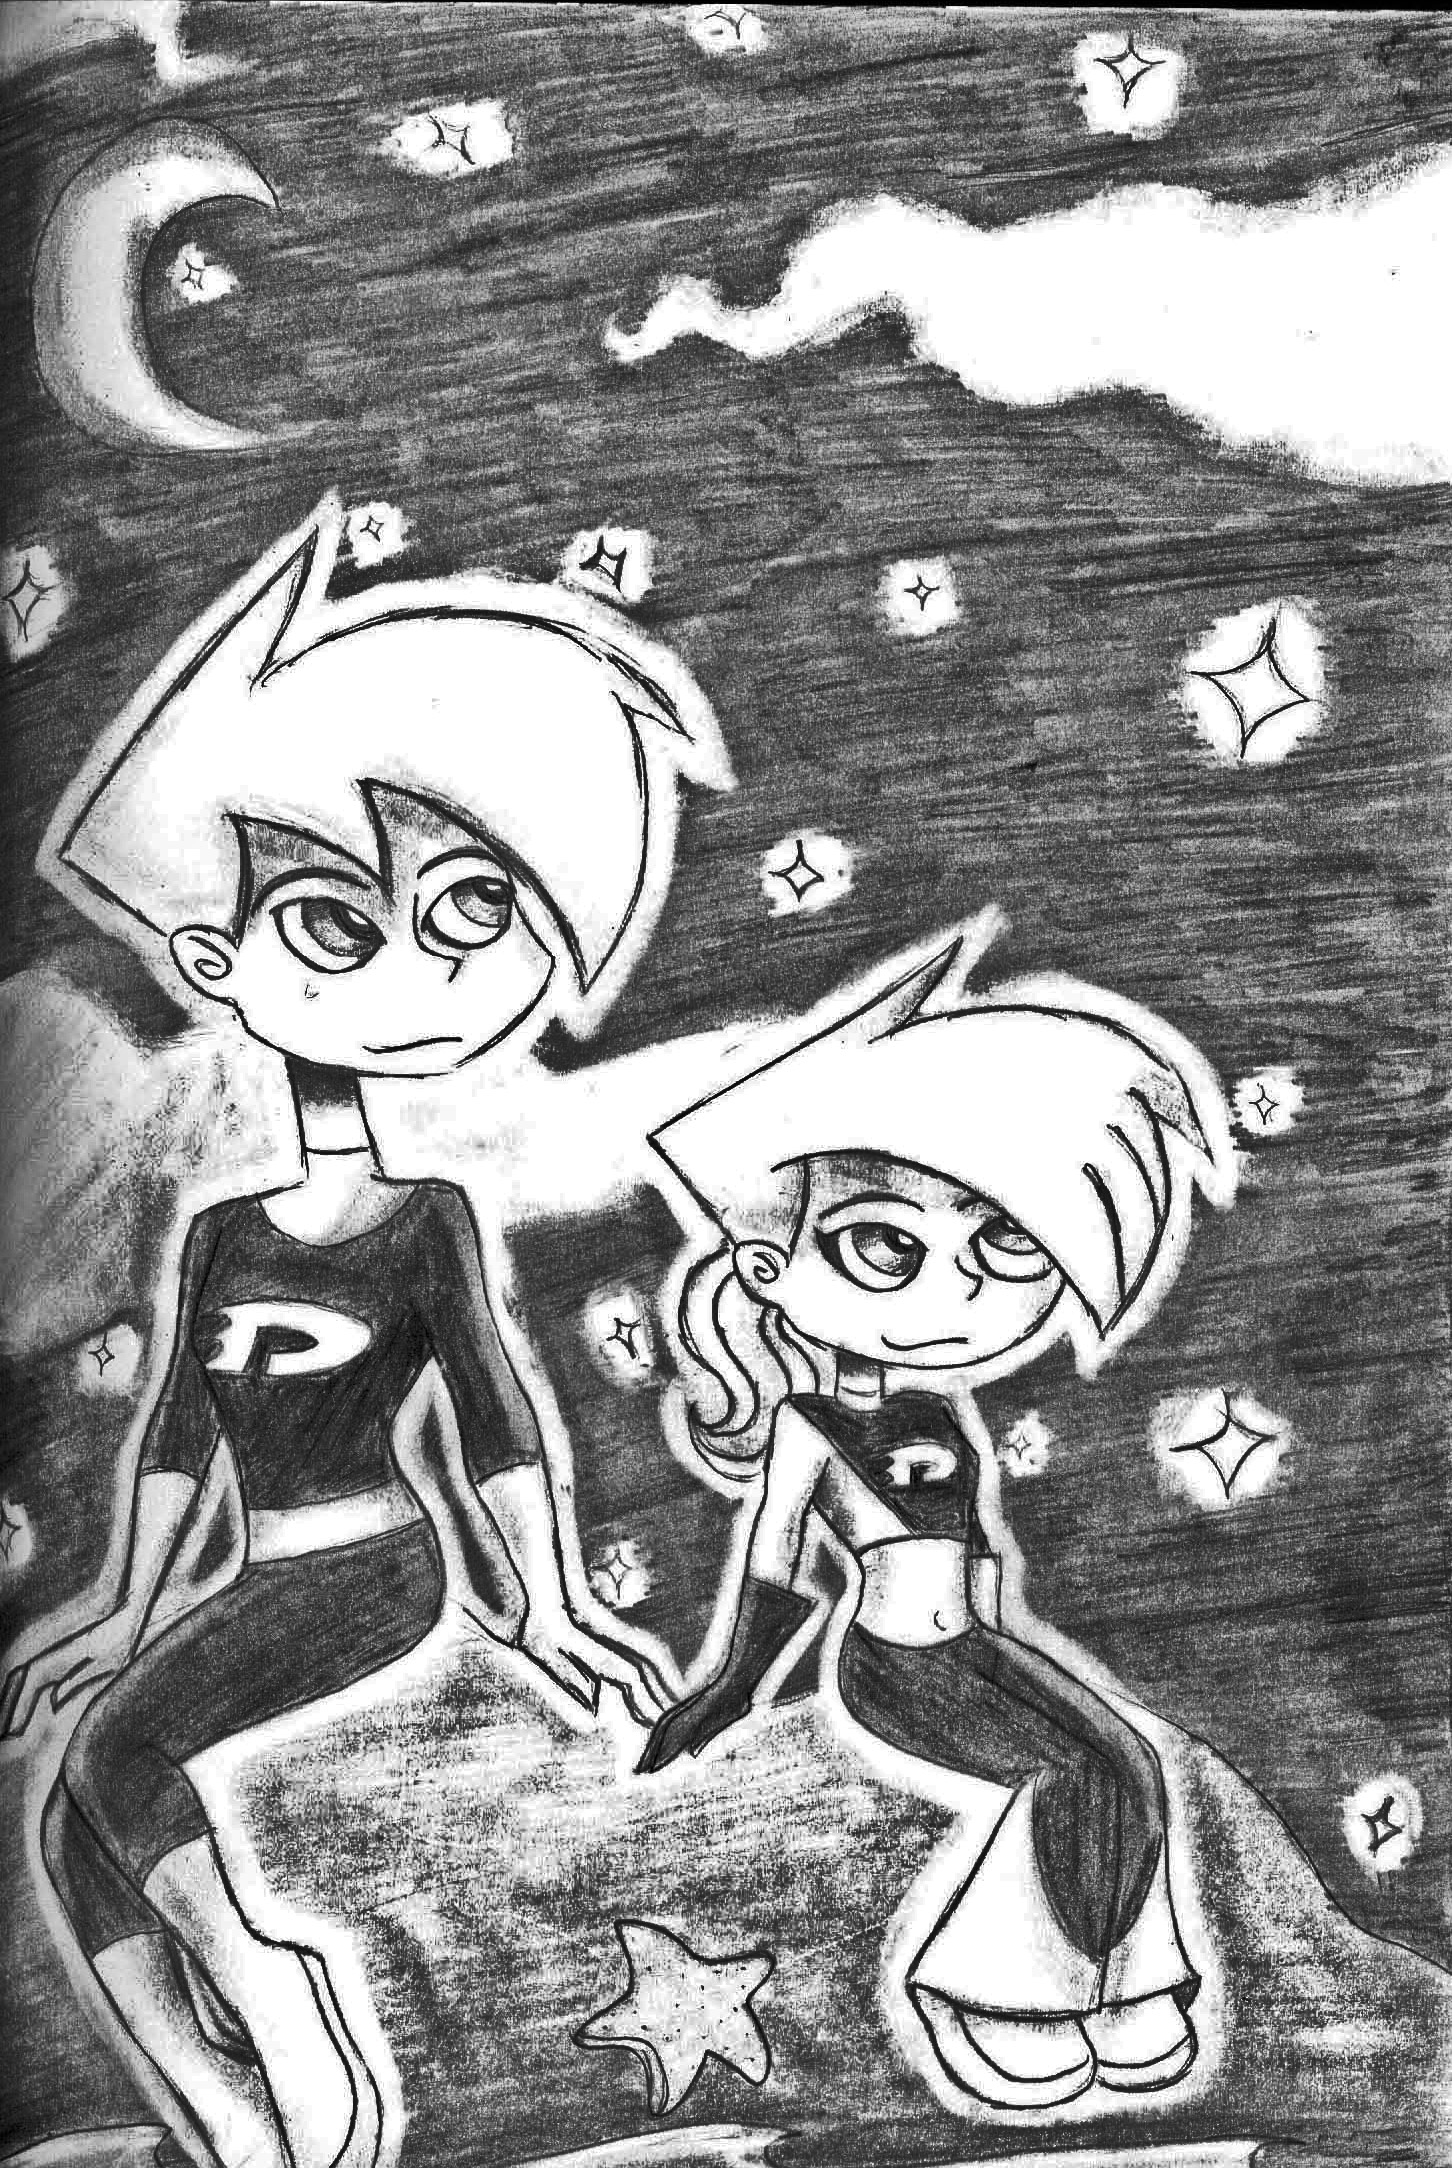 Danny and Danielle by the Ocean by dreamer45